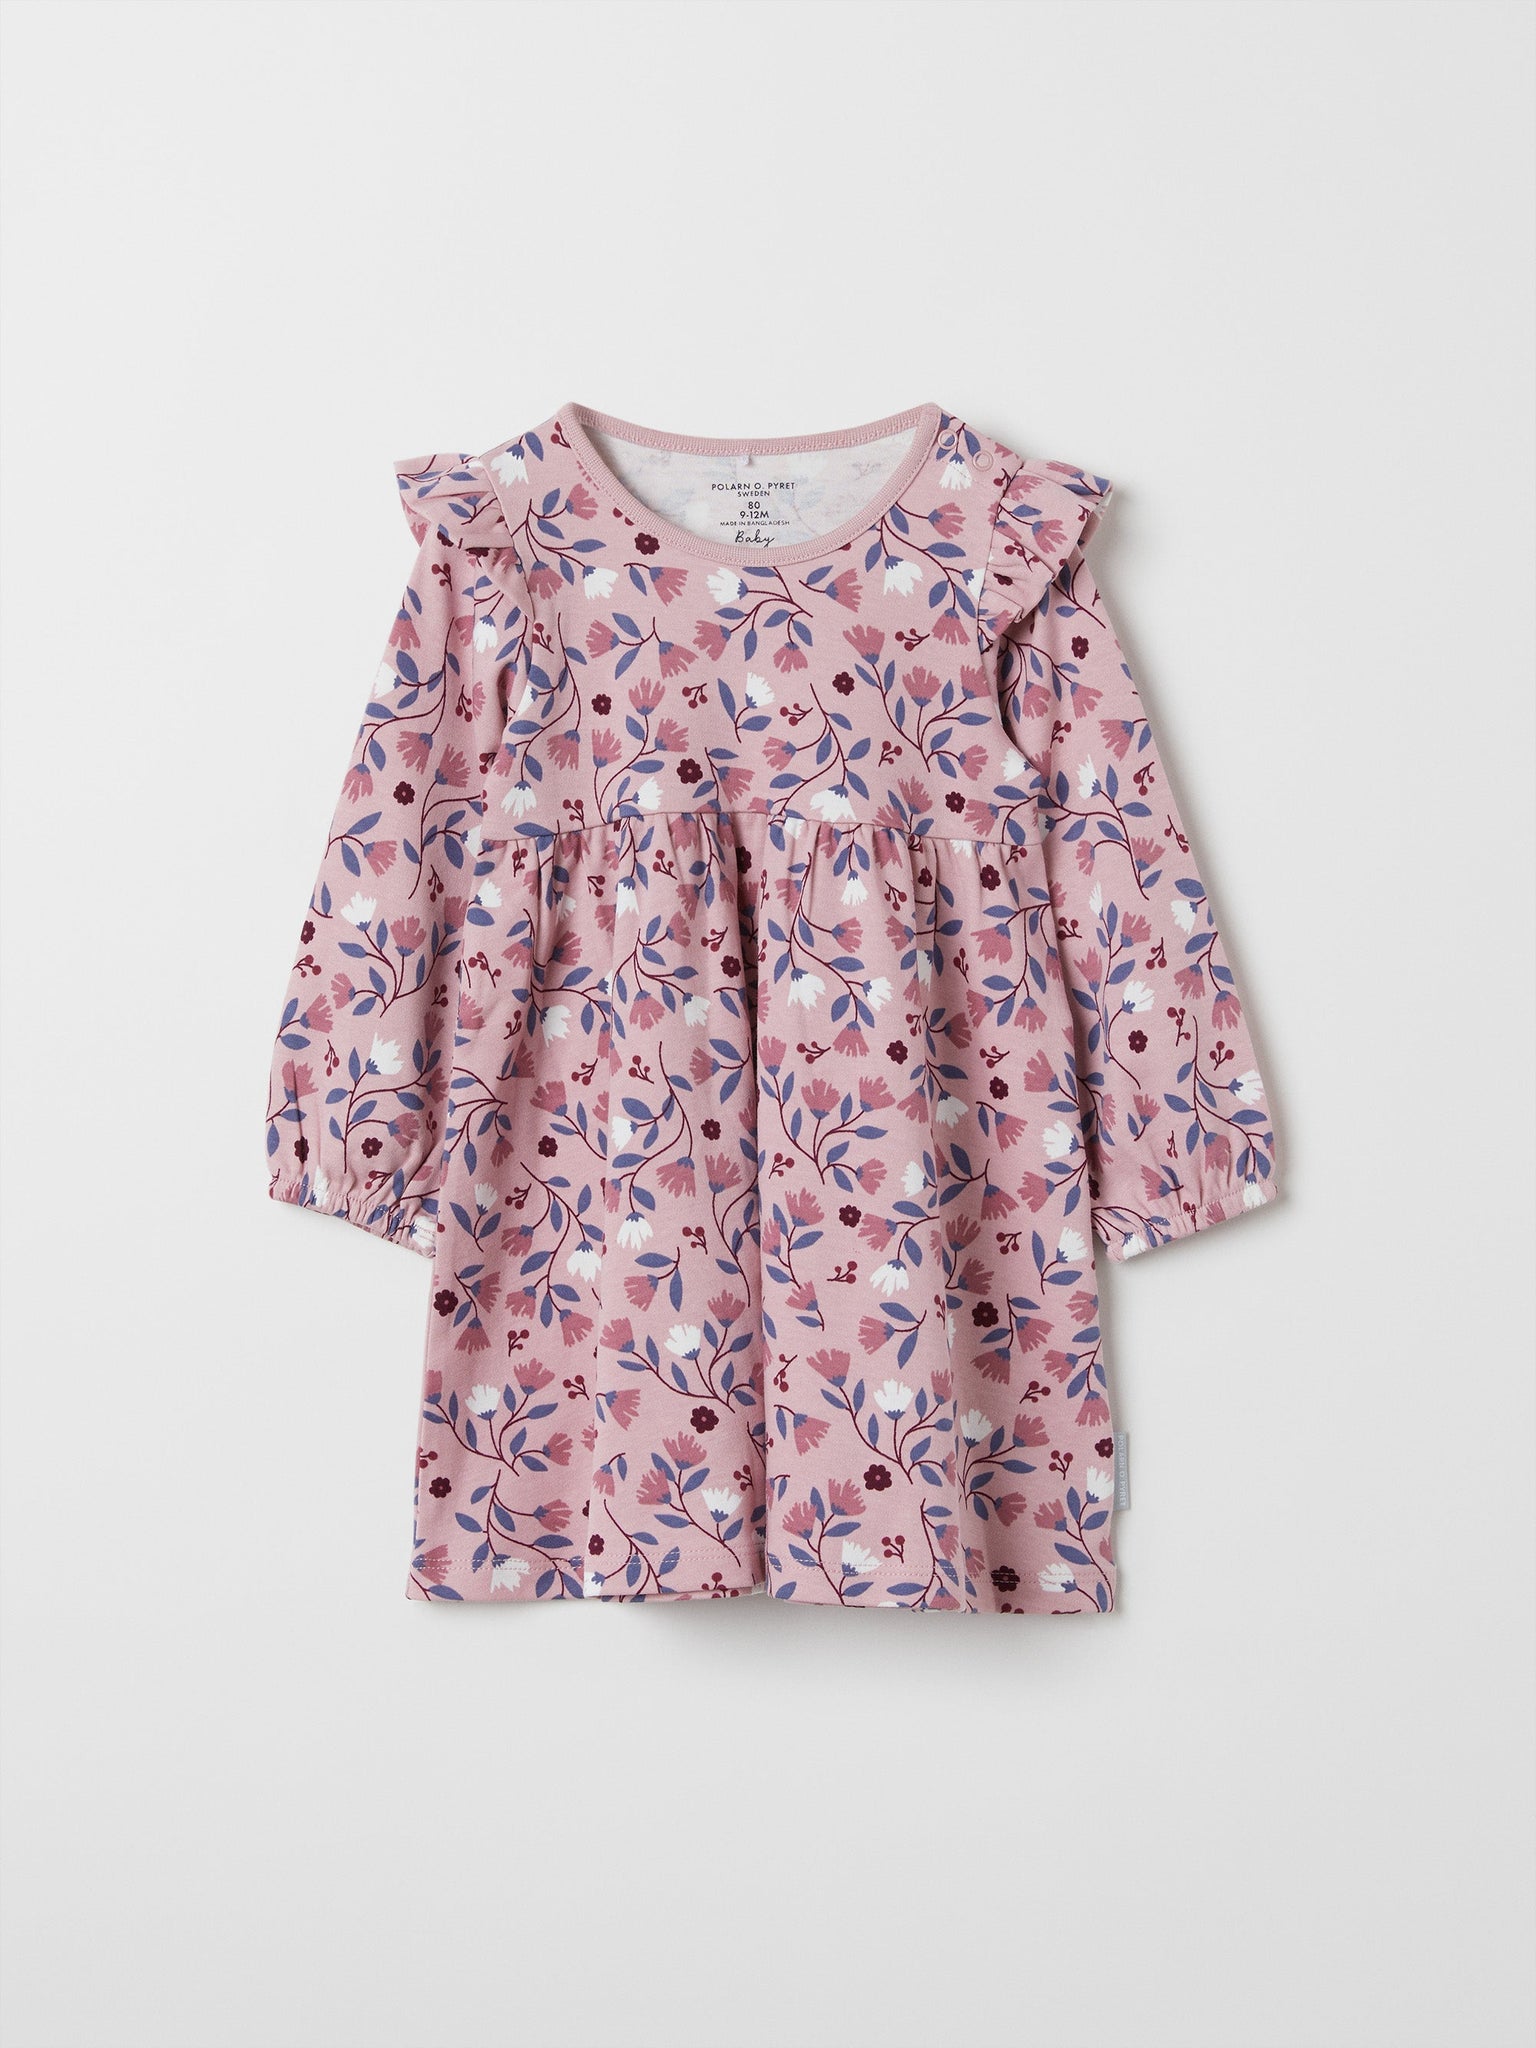 Organic Cotton Berry Print Baby Dress from the Polarn O. Pyret baby collection. Clothes made using sustainably sourced materials.